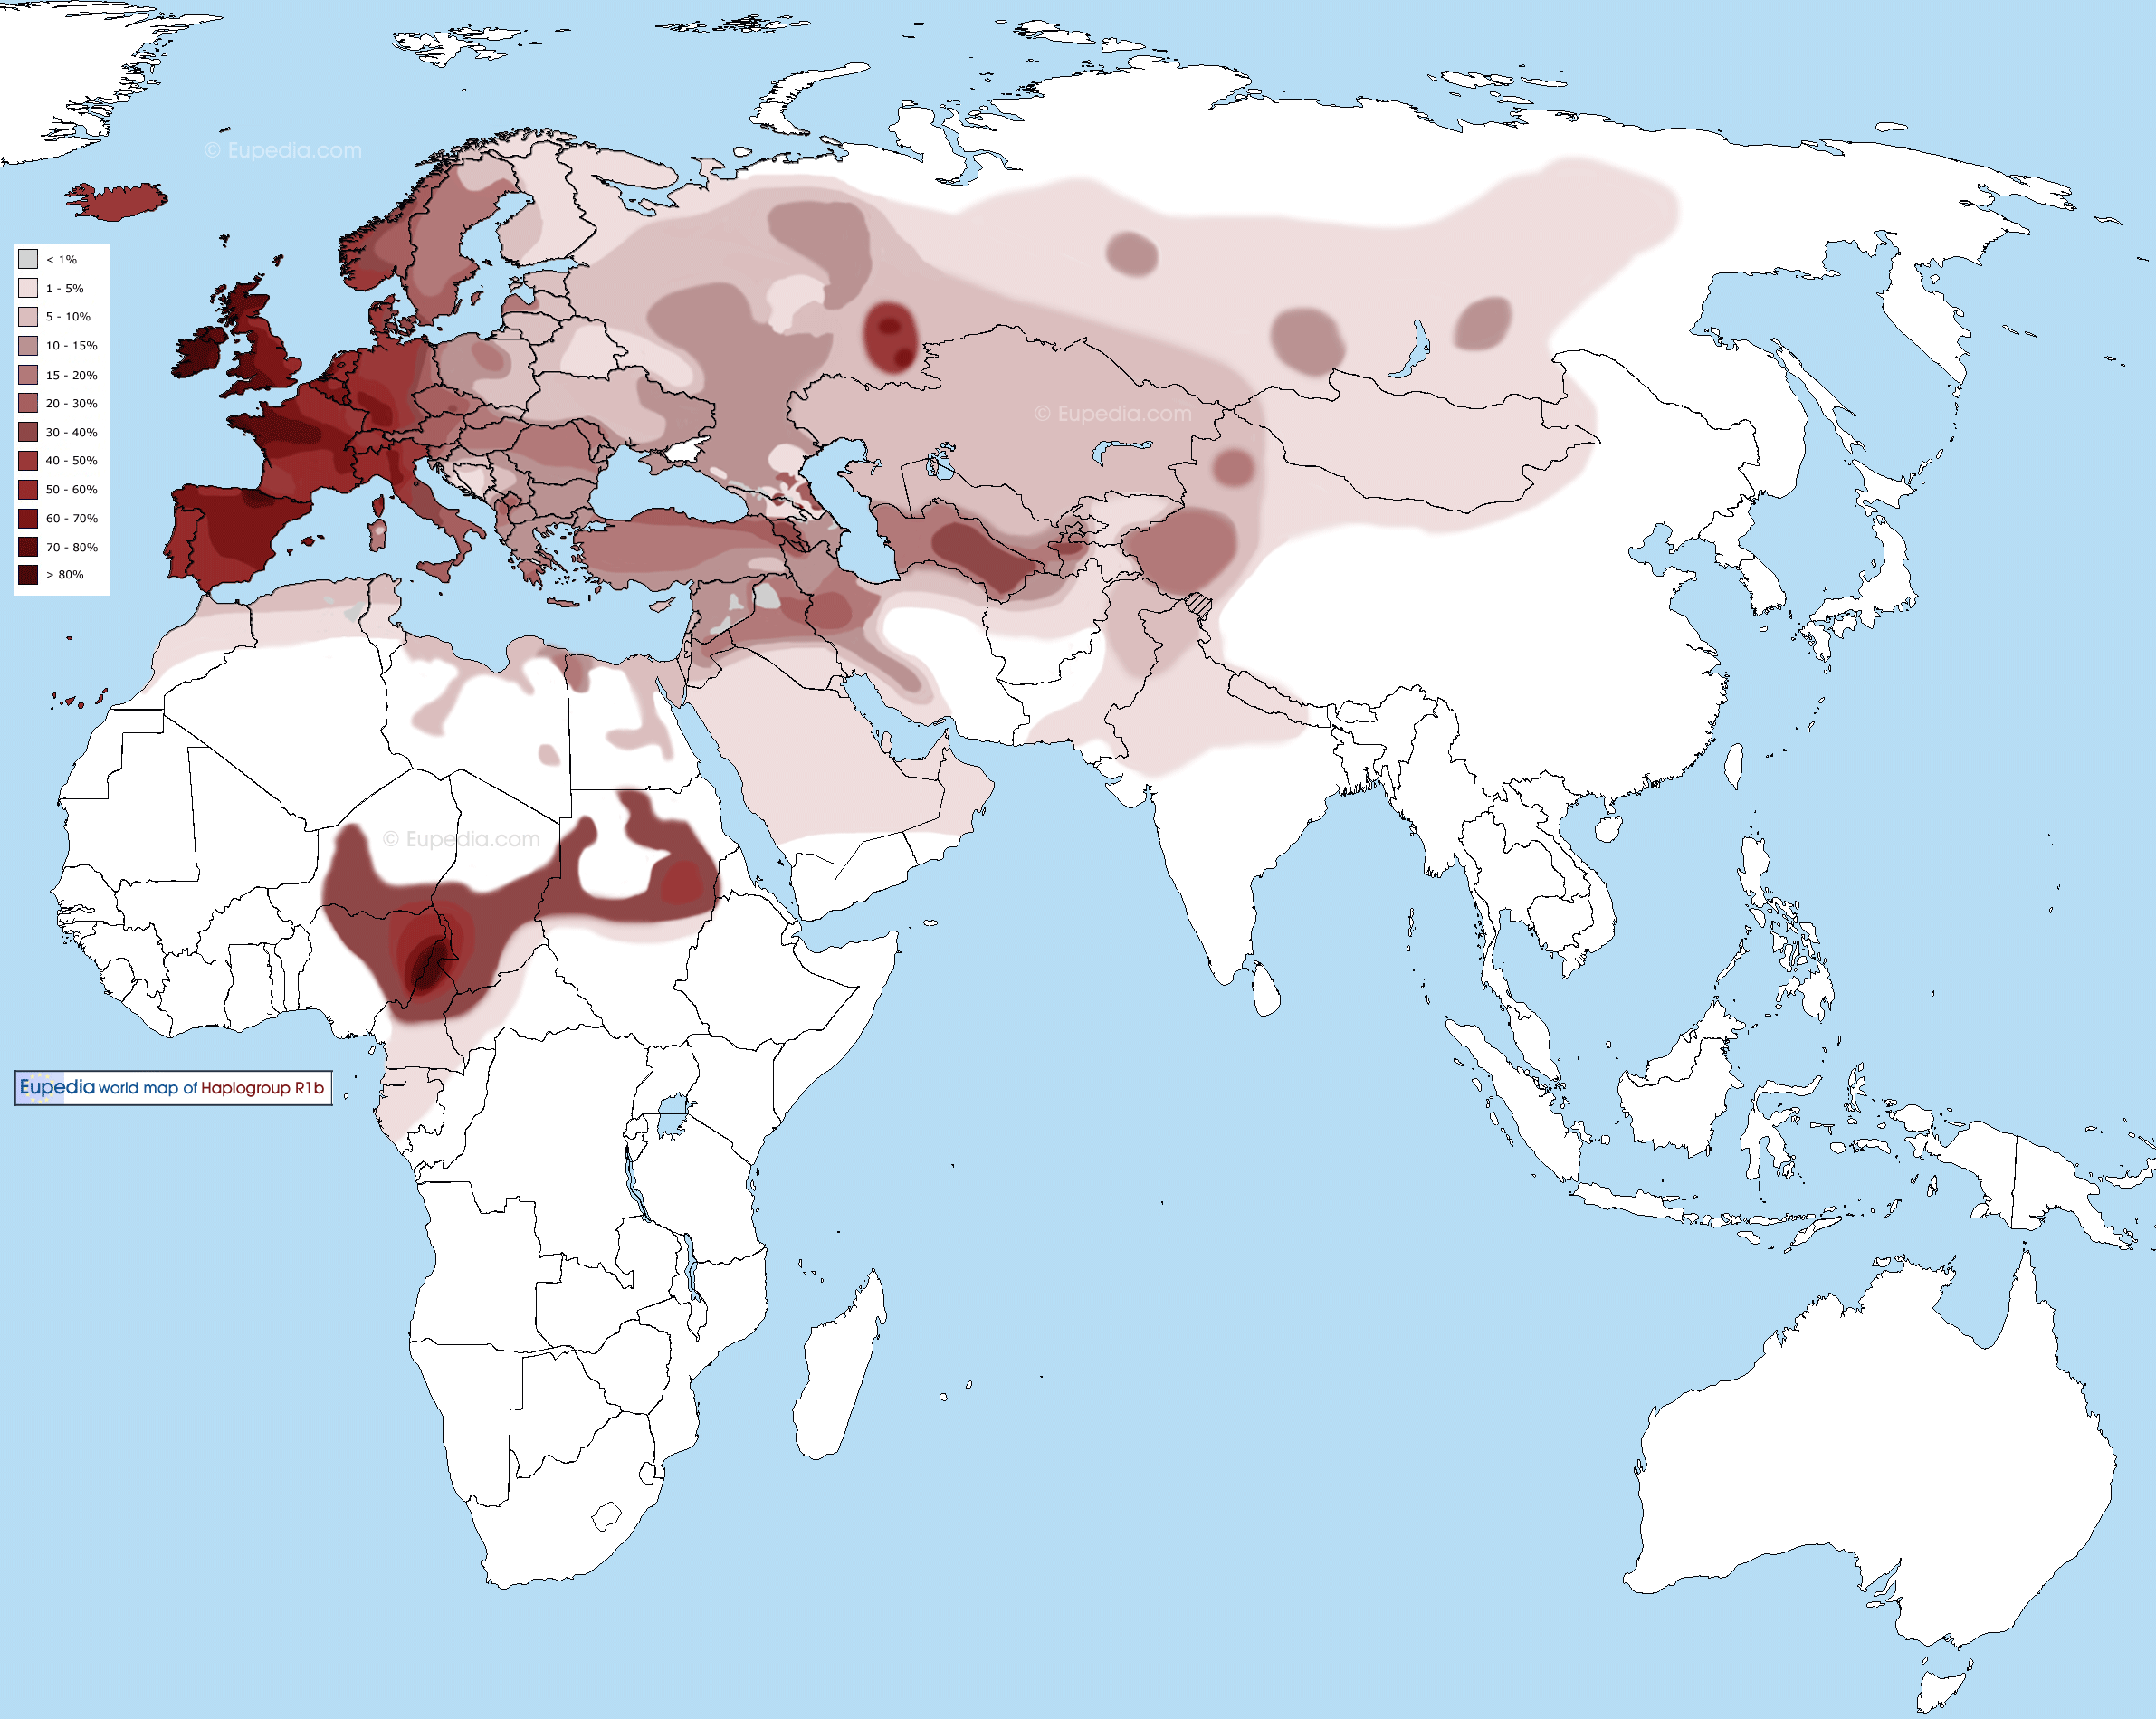 Distribution map of haplogroup R1b in the Old World (Eurasia and Africa) - Eupedia